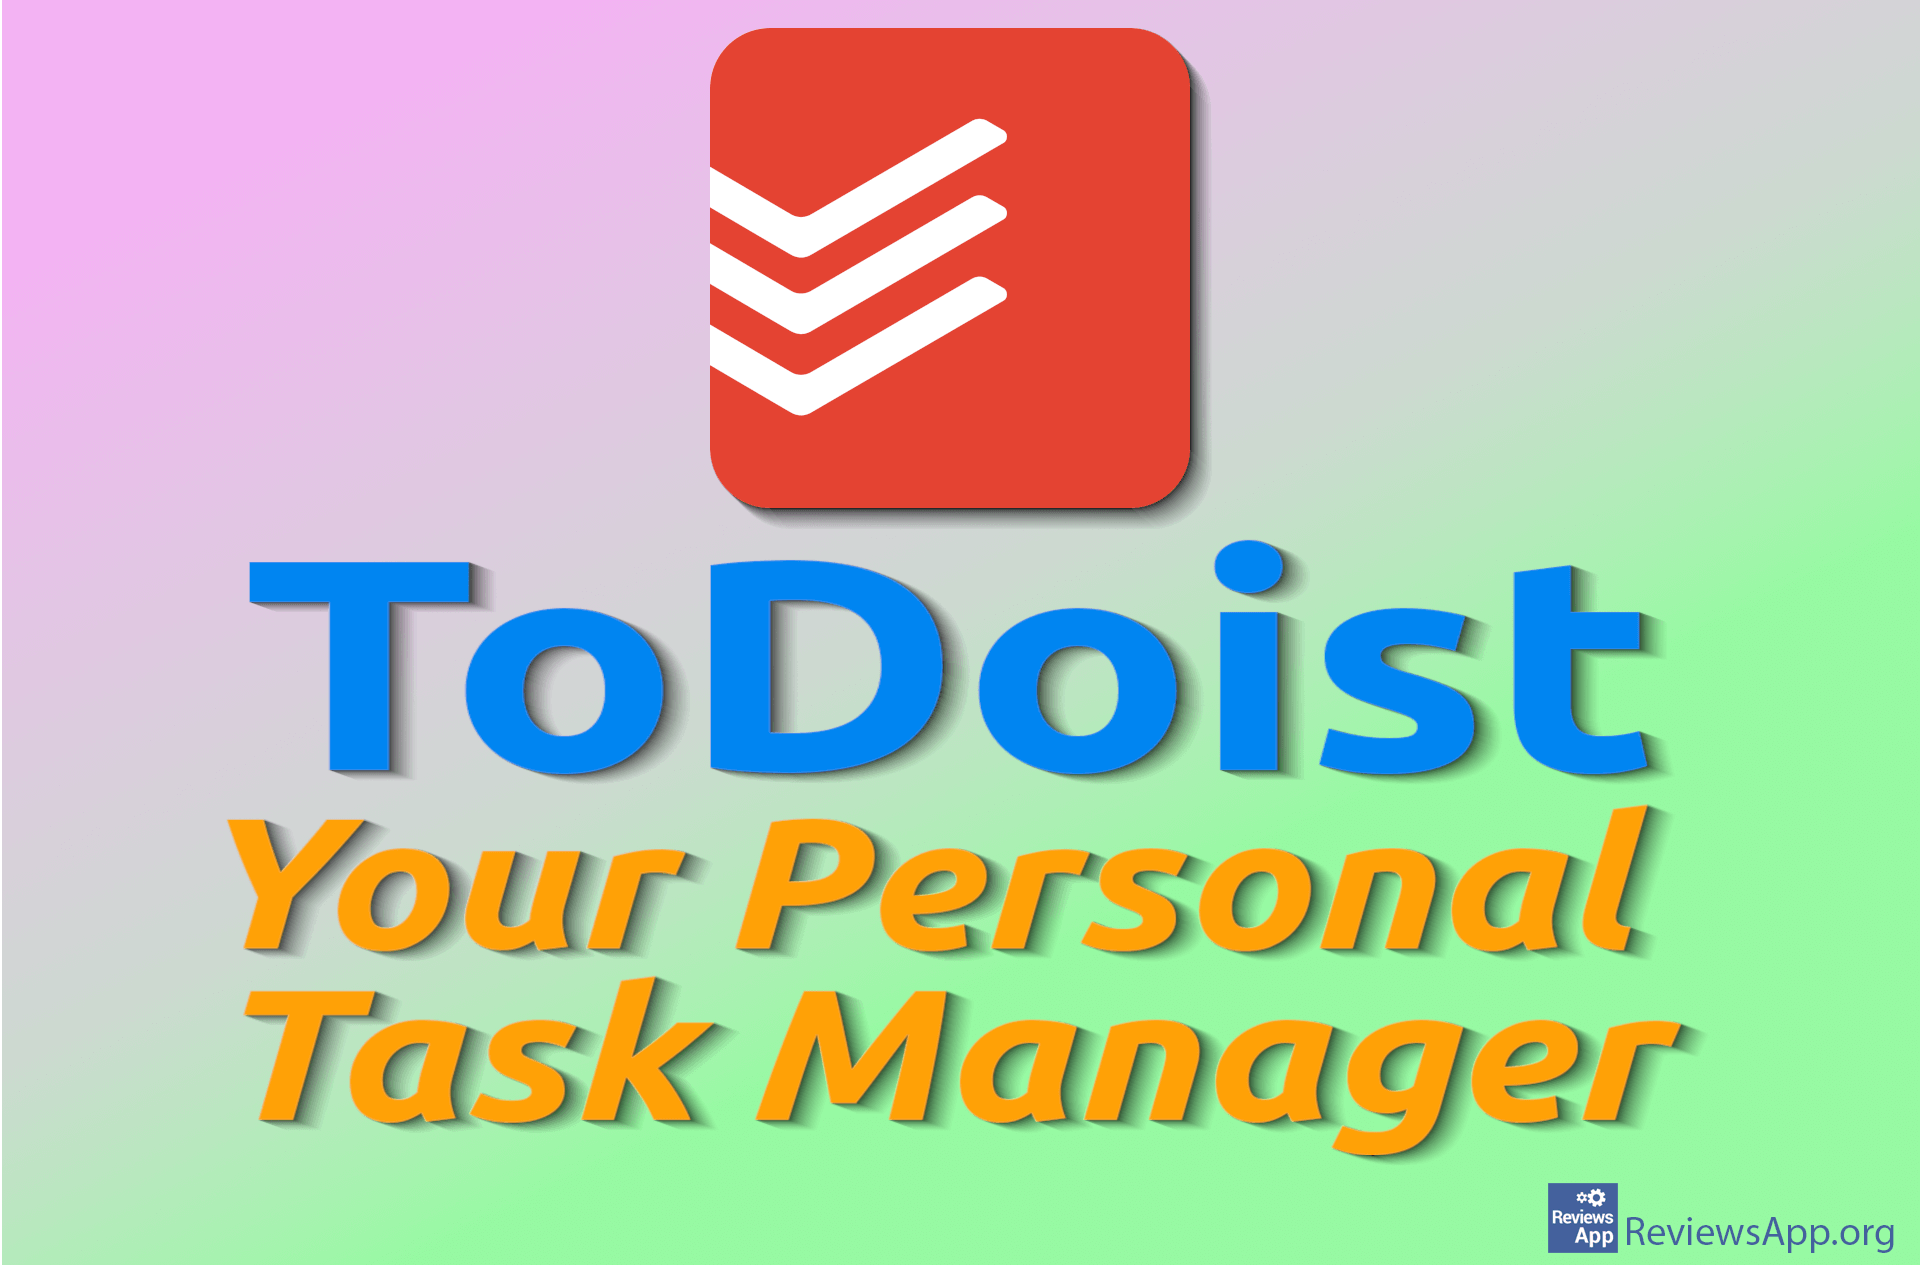 ToDoist – Your Personal Task Manager